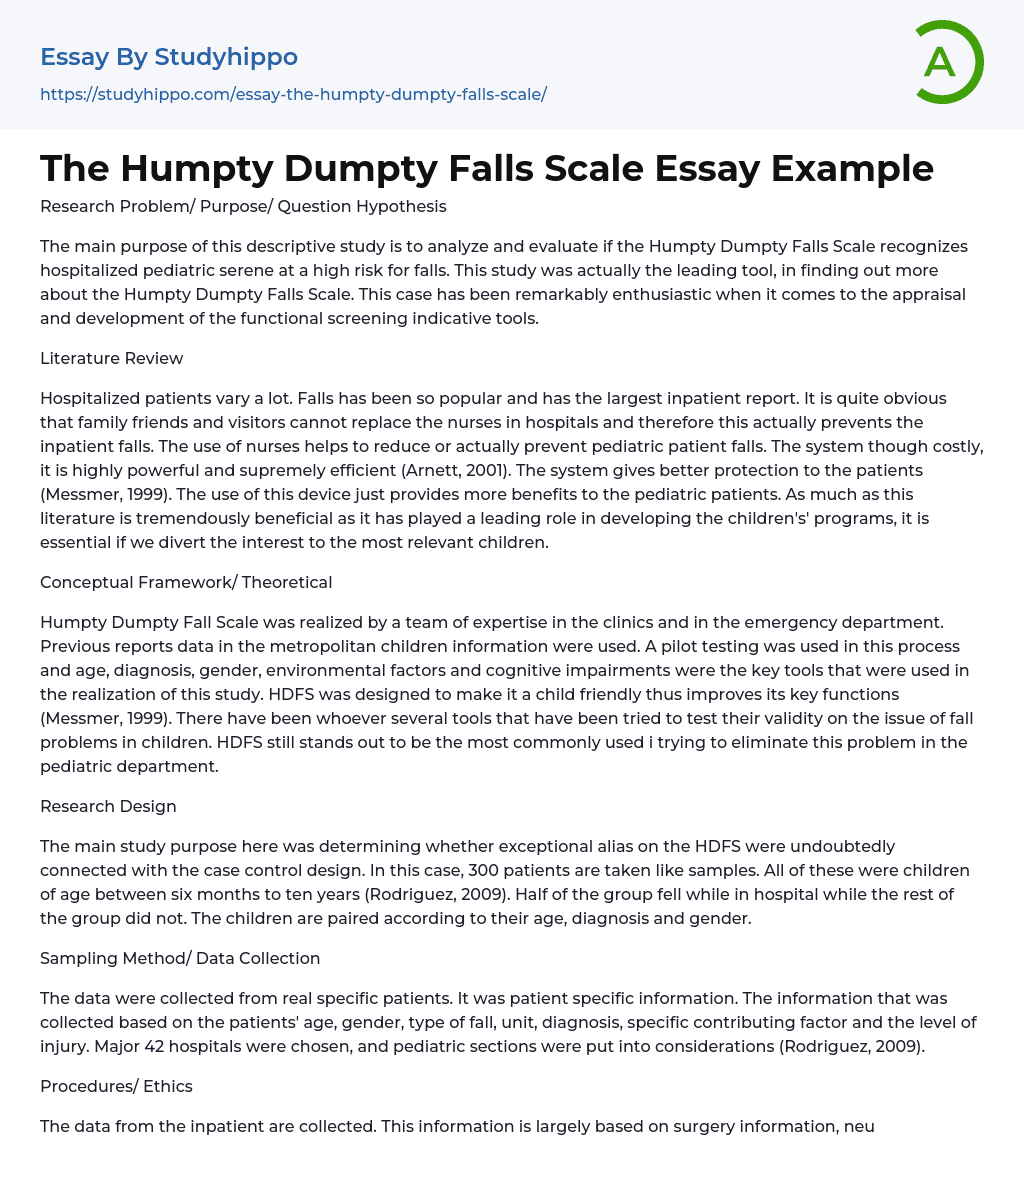 The Humpty Dumpty Falls Scale Essay Example